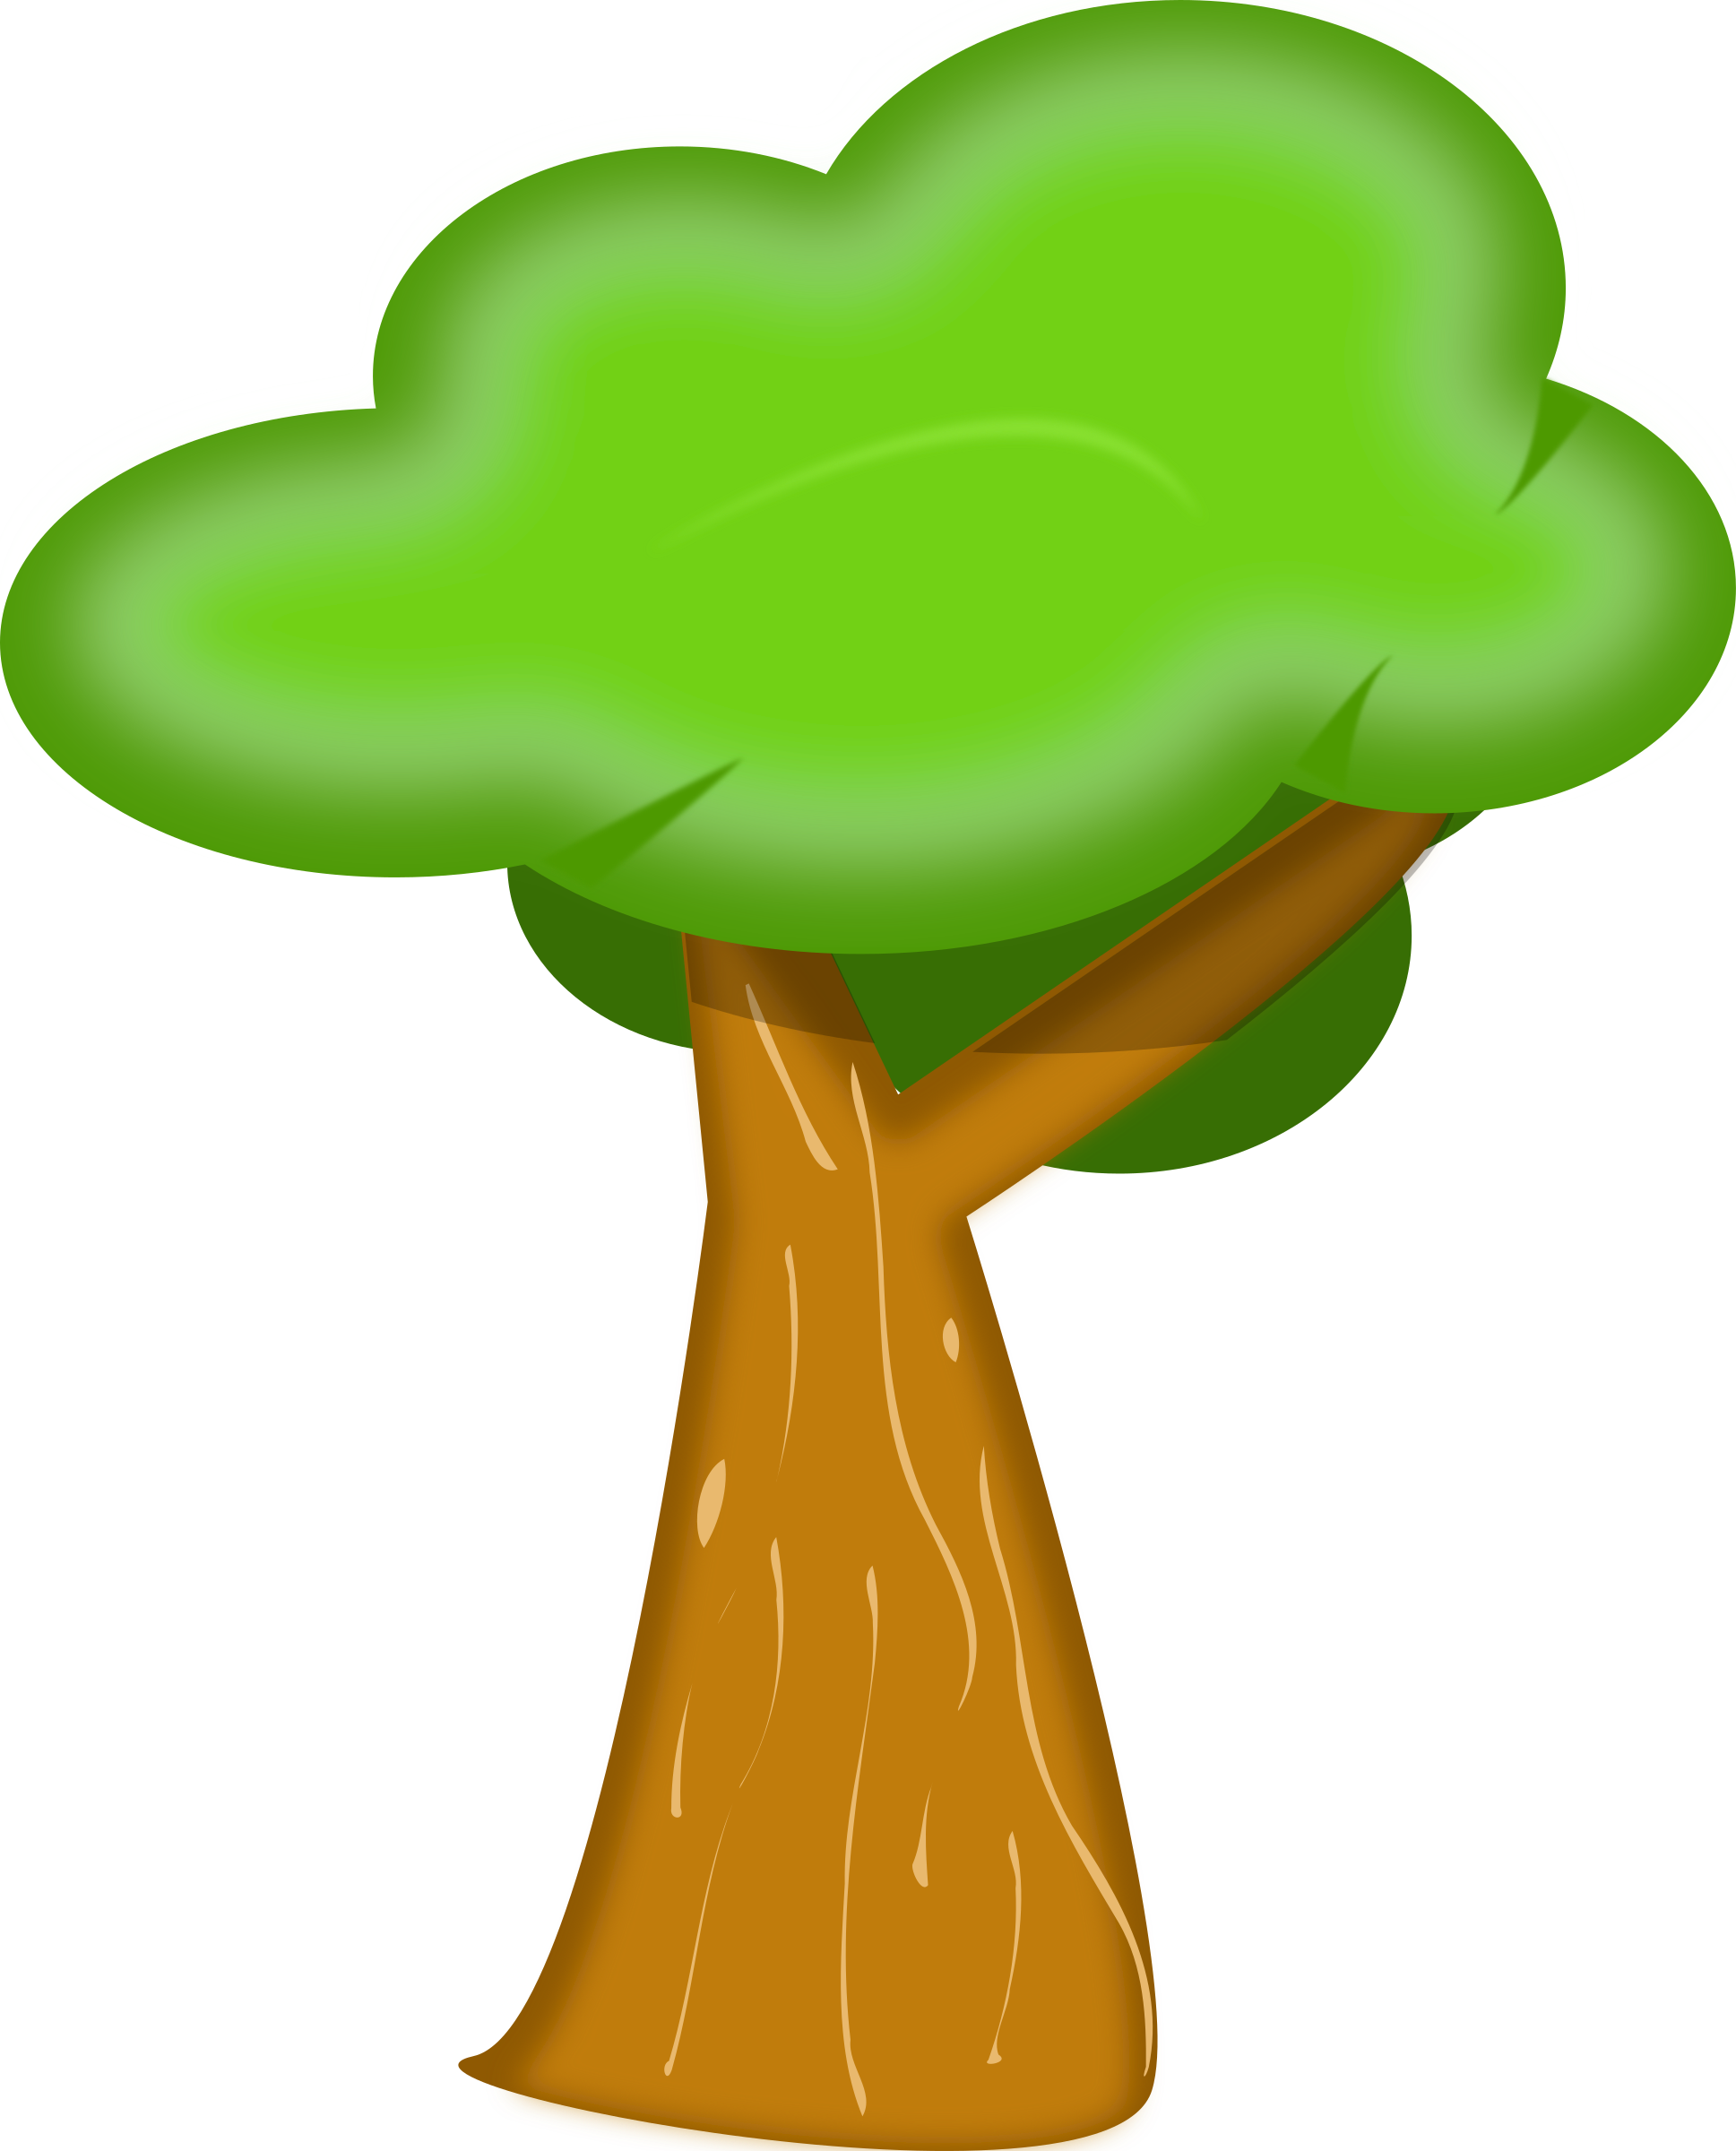 This Free Icons Png Design Of Soft Trees 1 - This Free Icons Png Design Of Soft Trees 1 (1937x2400)